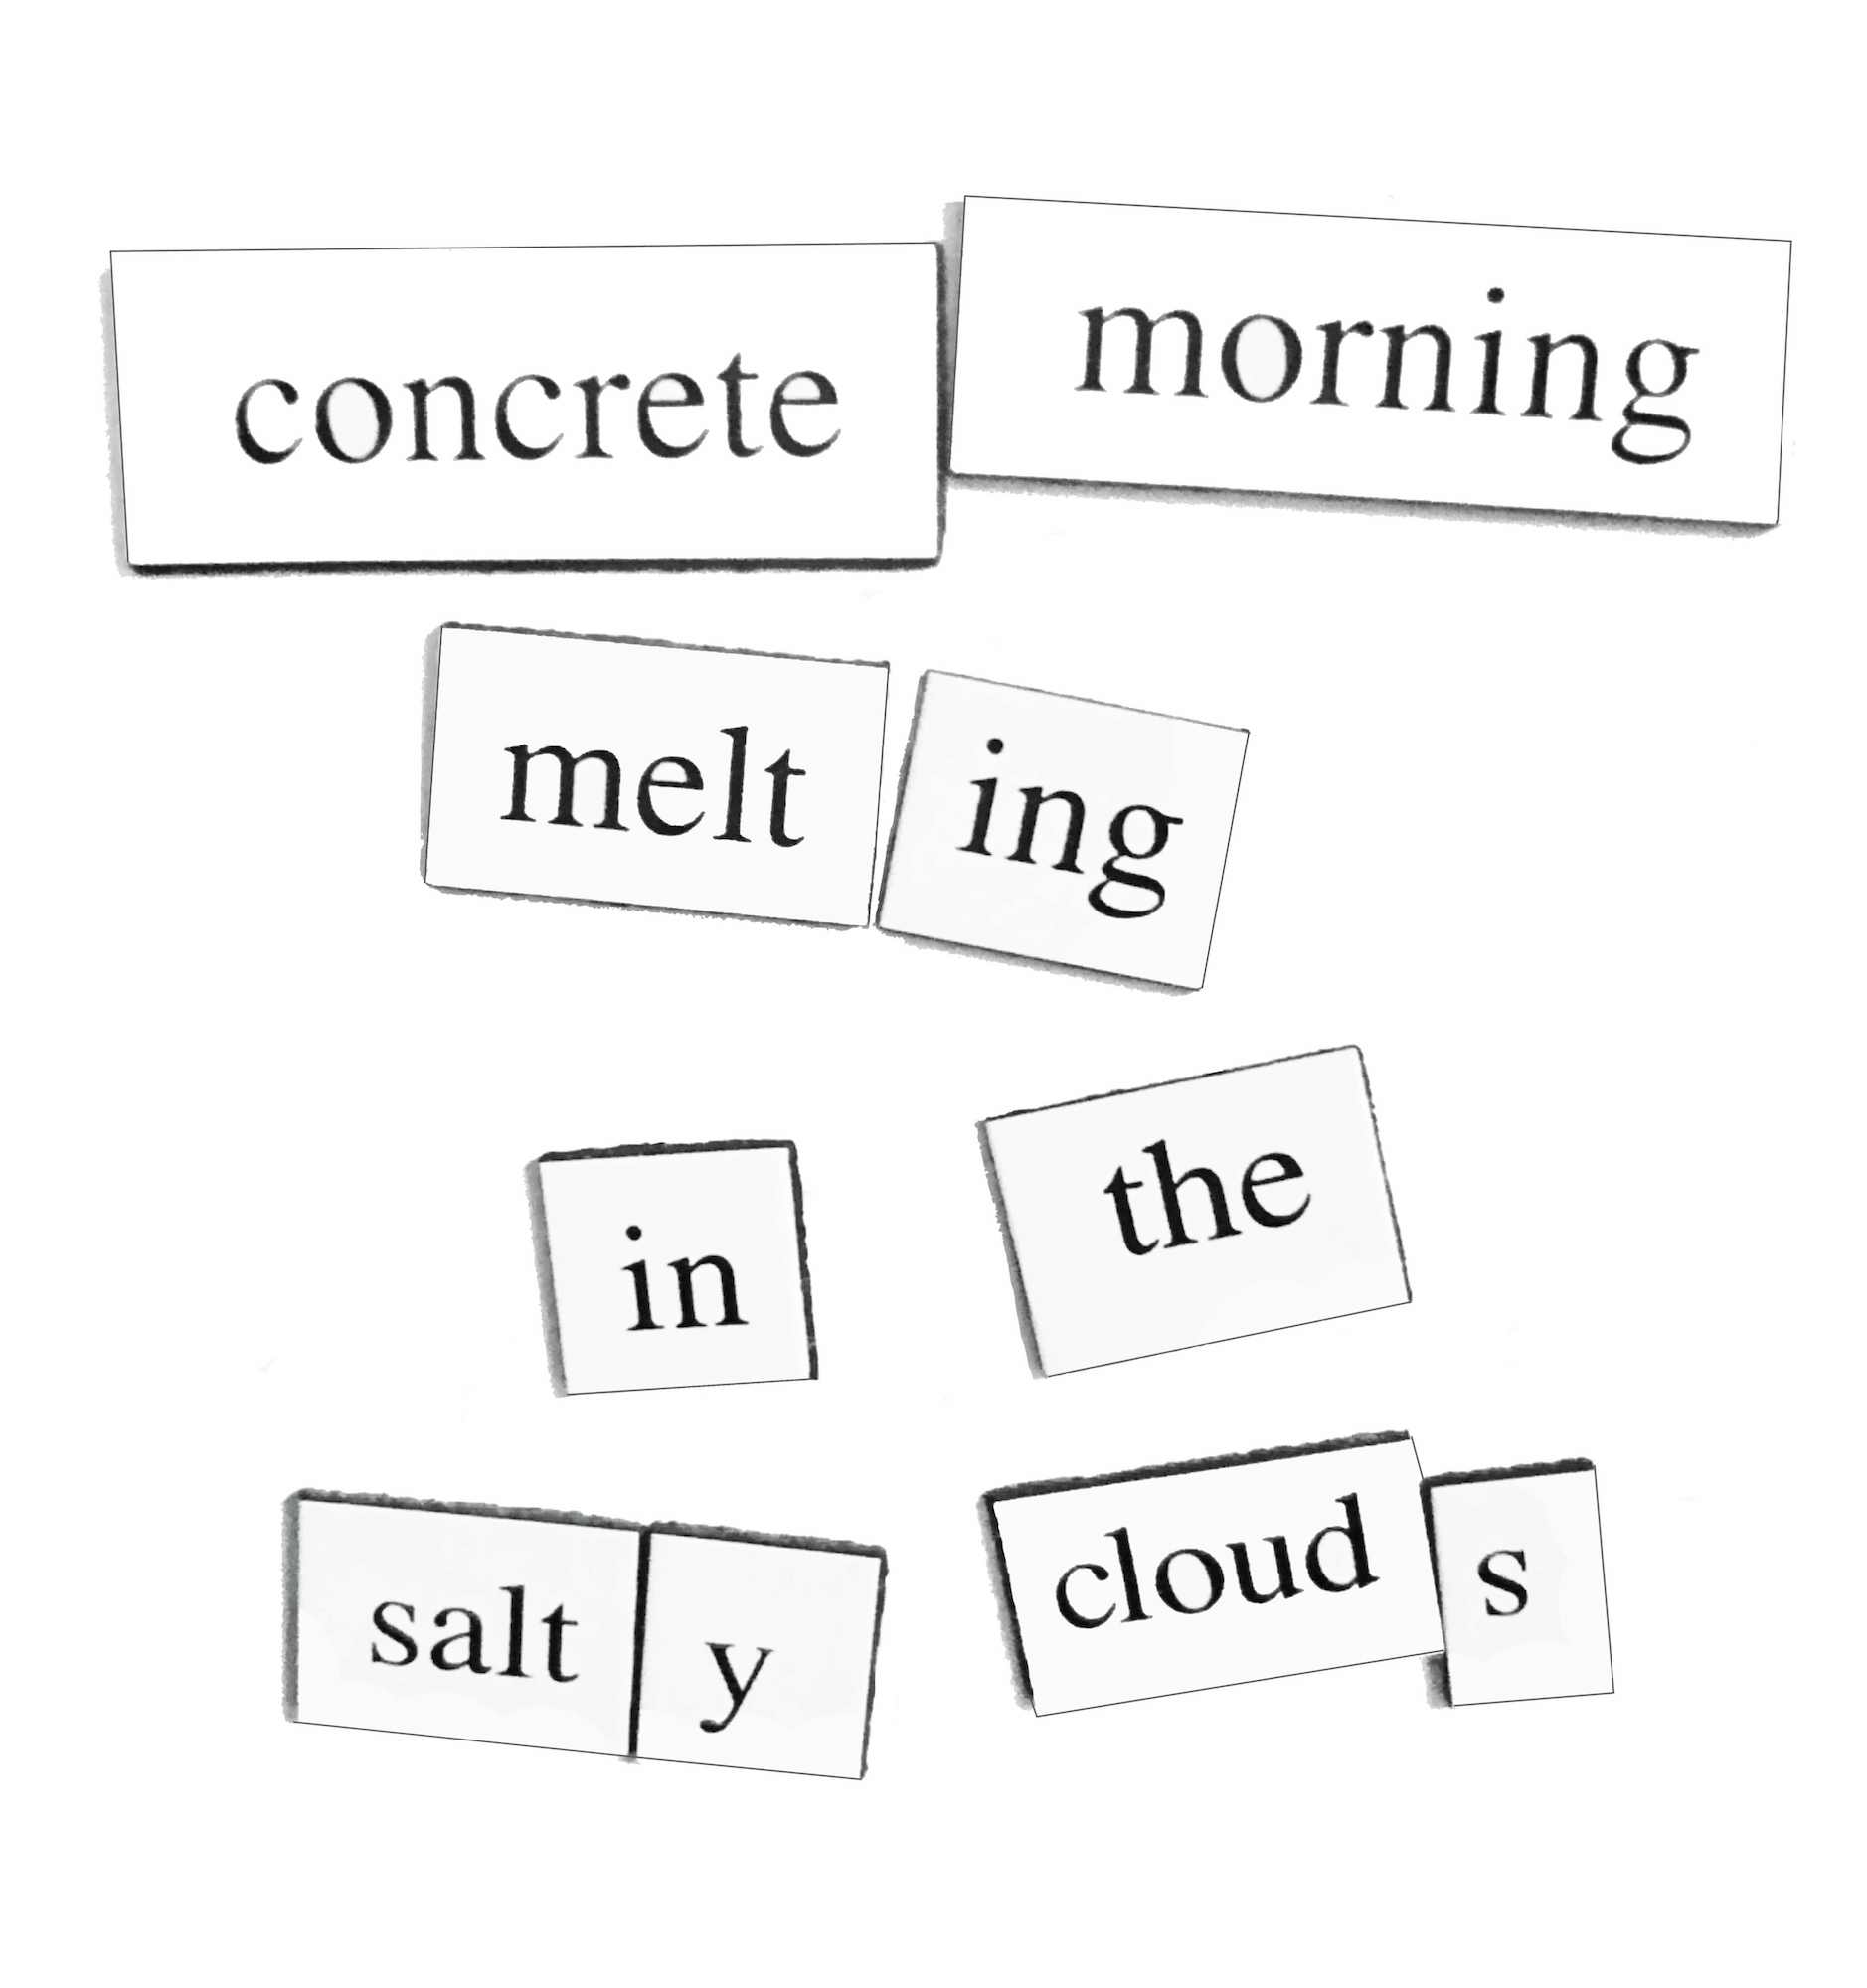 art every day number 692 / magnets & words / salty clouds